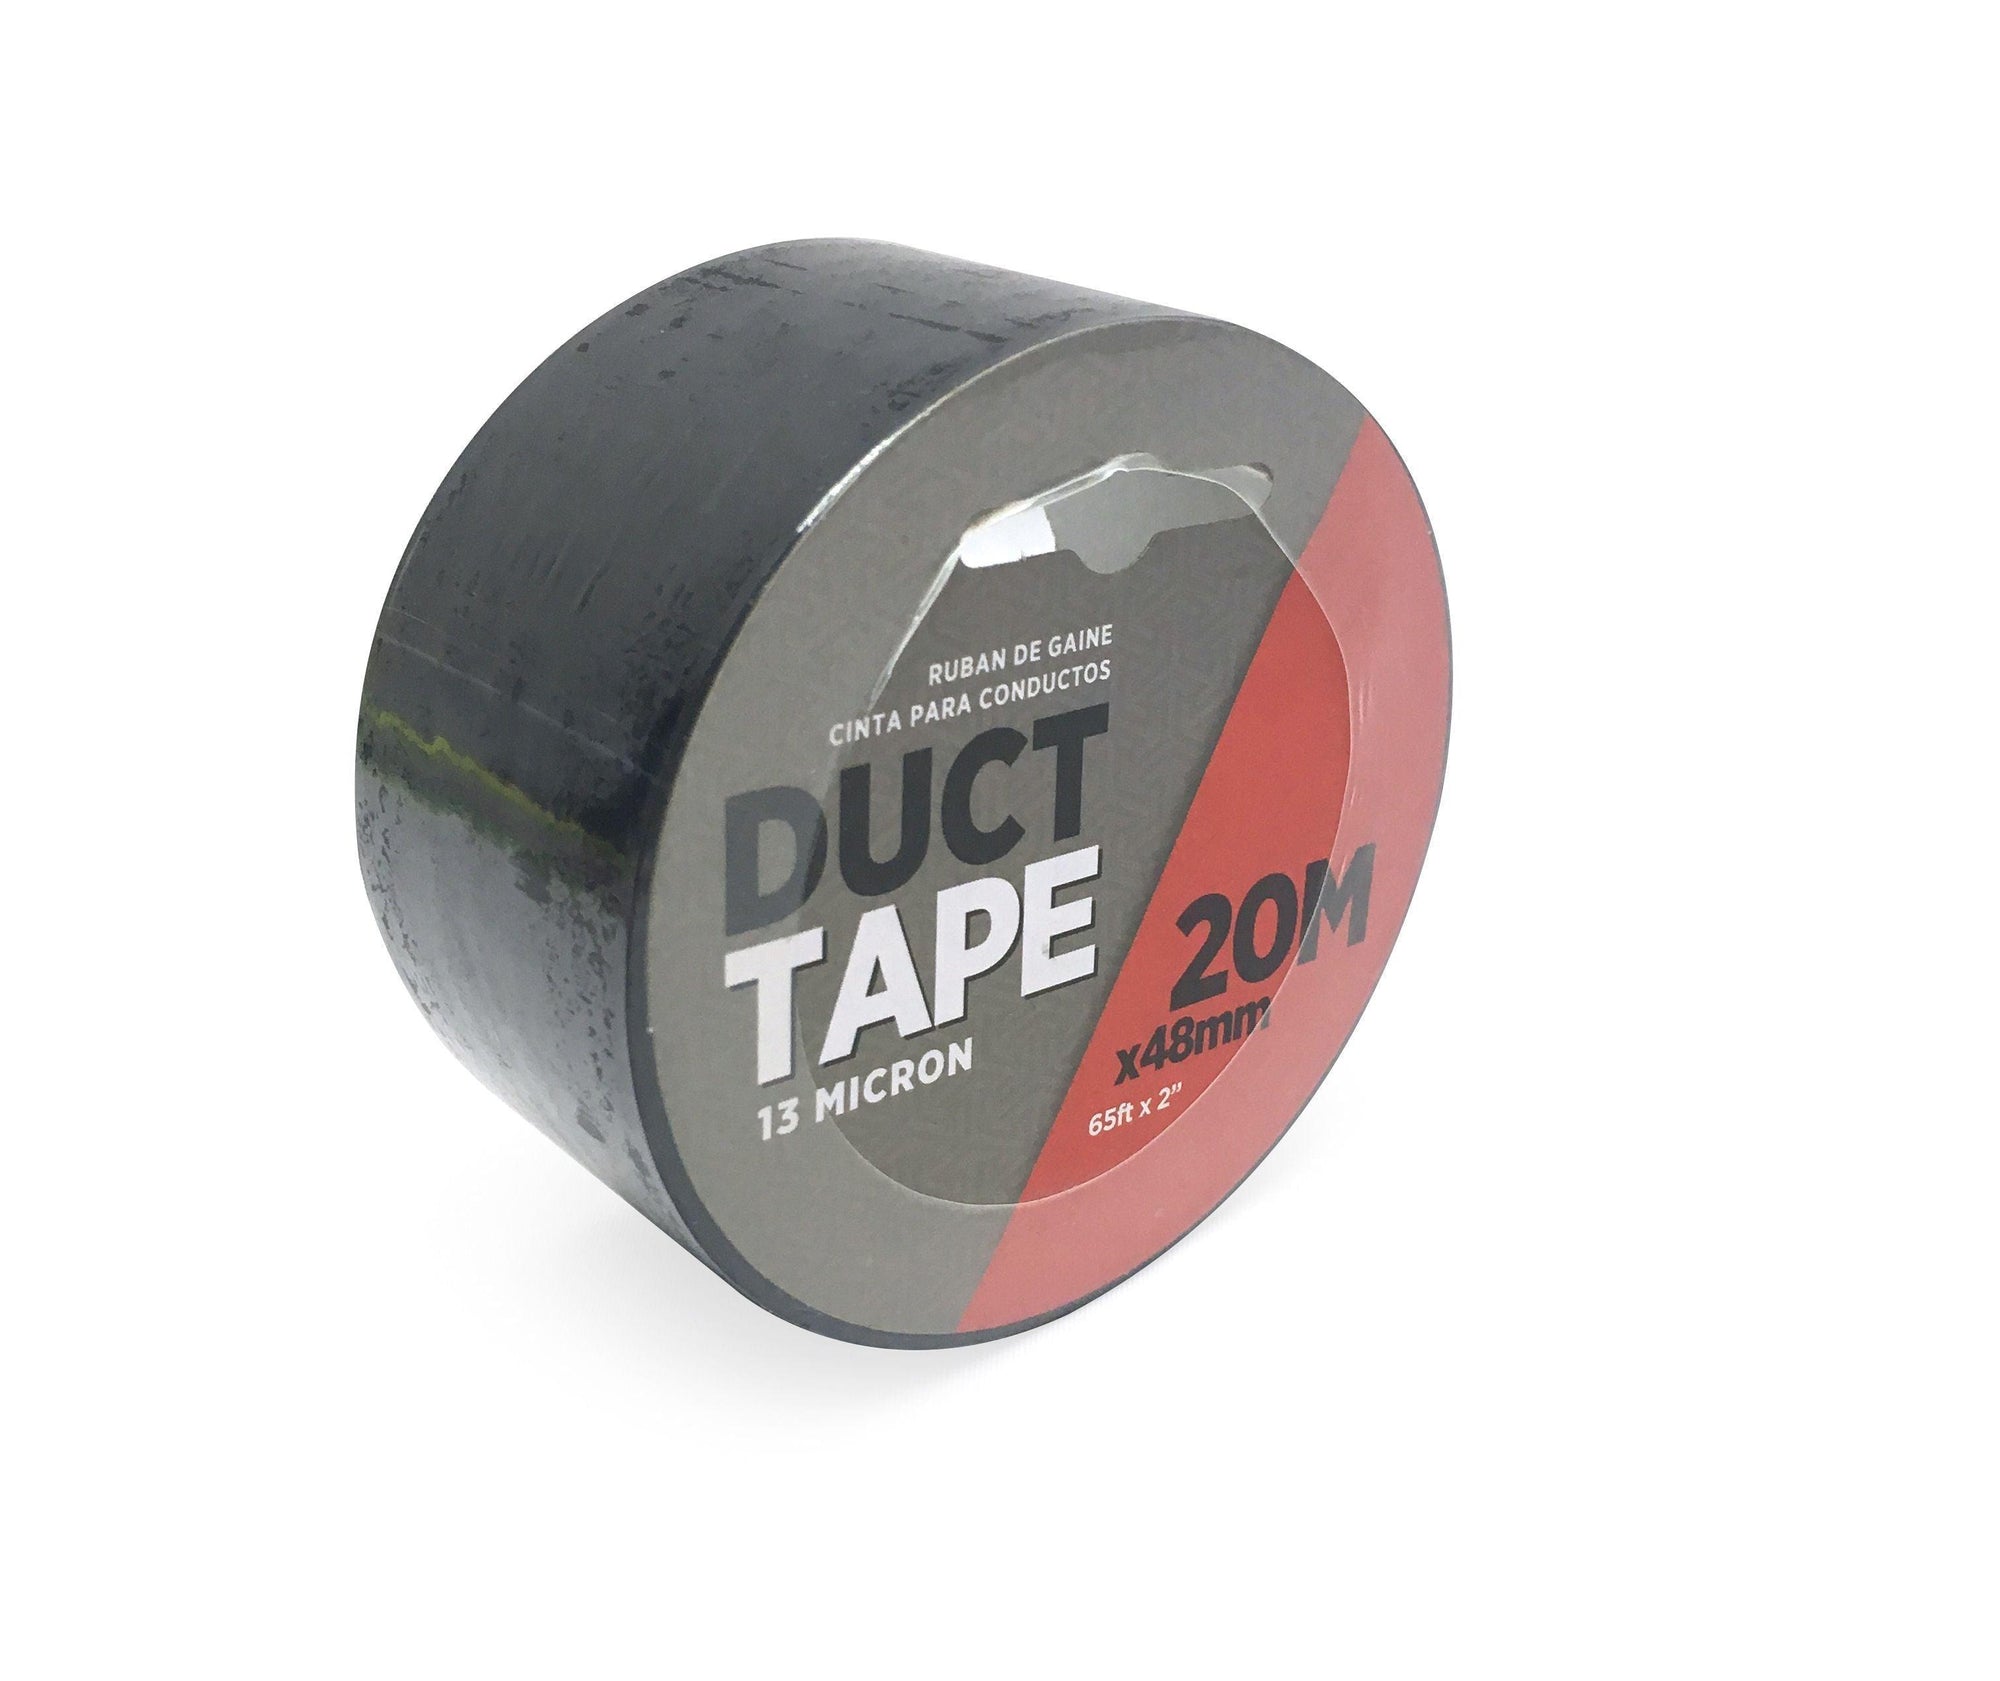 Duct Tape | 20m x 48mm | Black & Silver | 13 Micron - Choice Stores